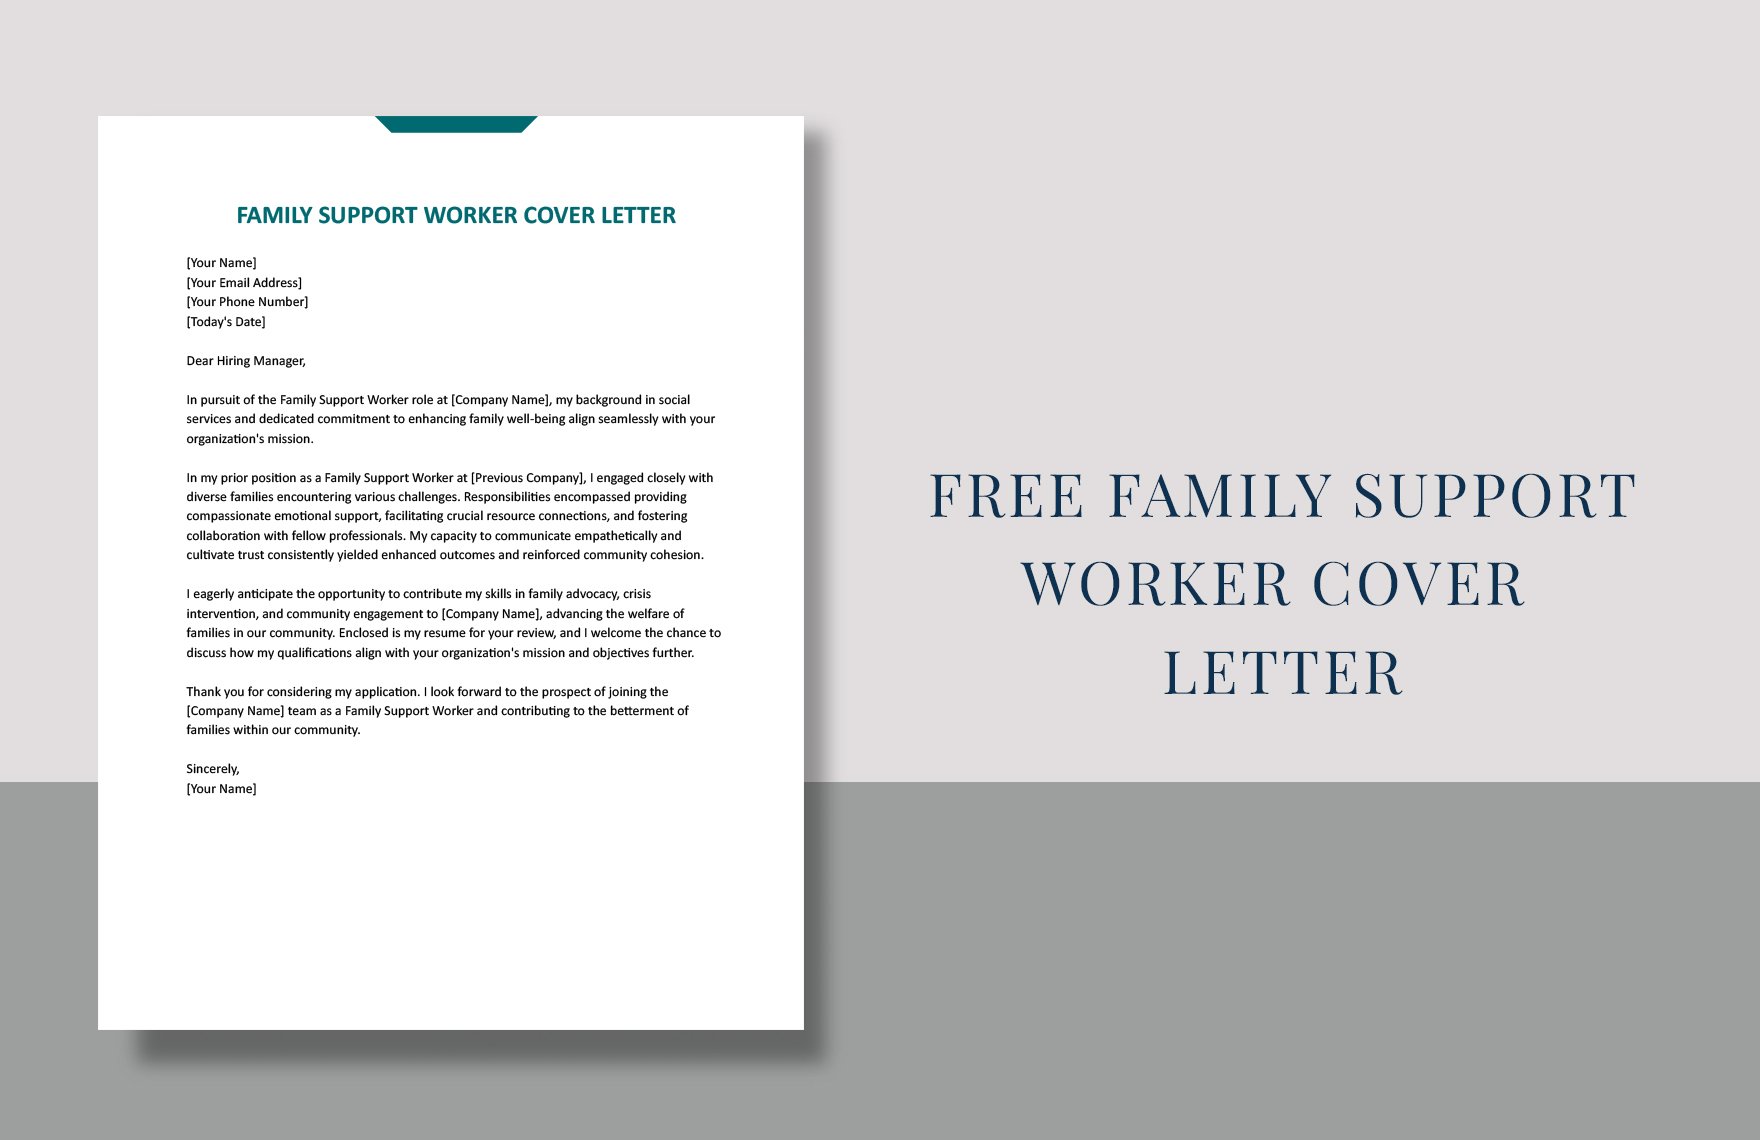 Family Support Worker Cover Letter